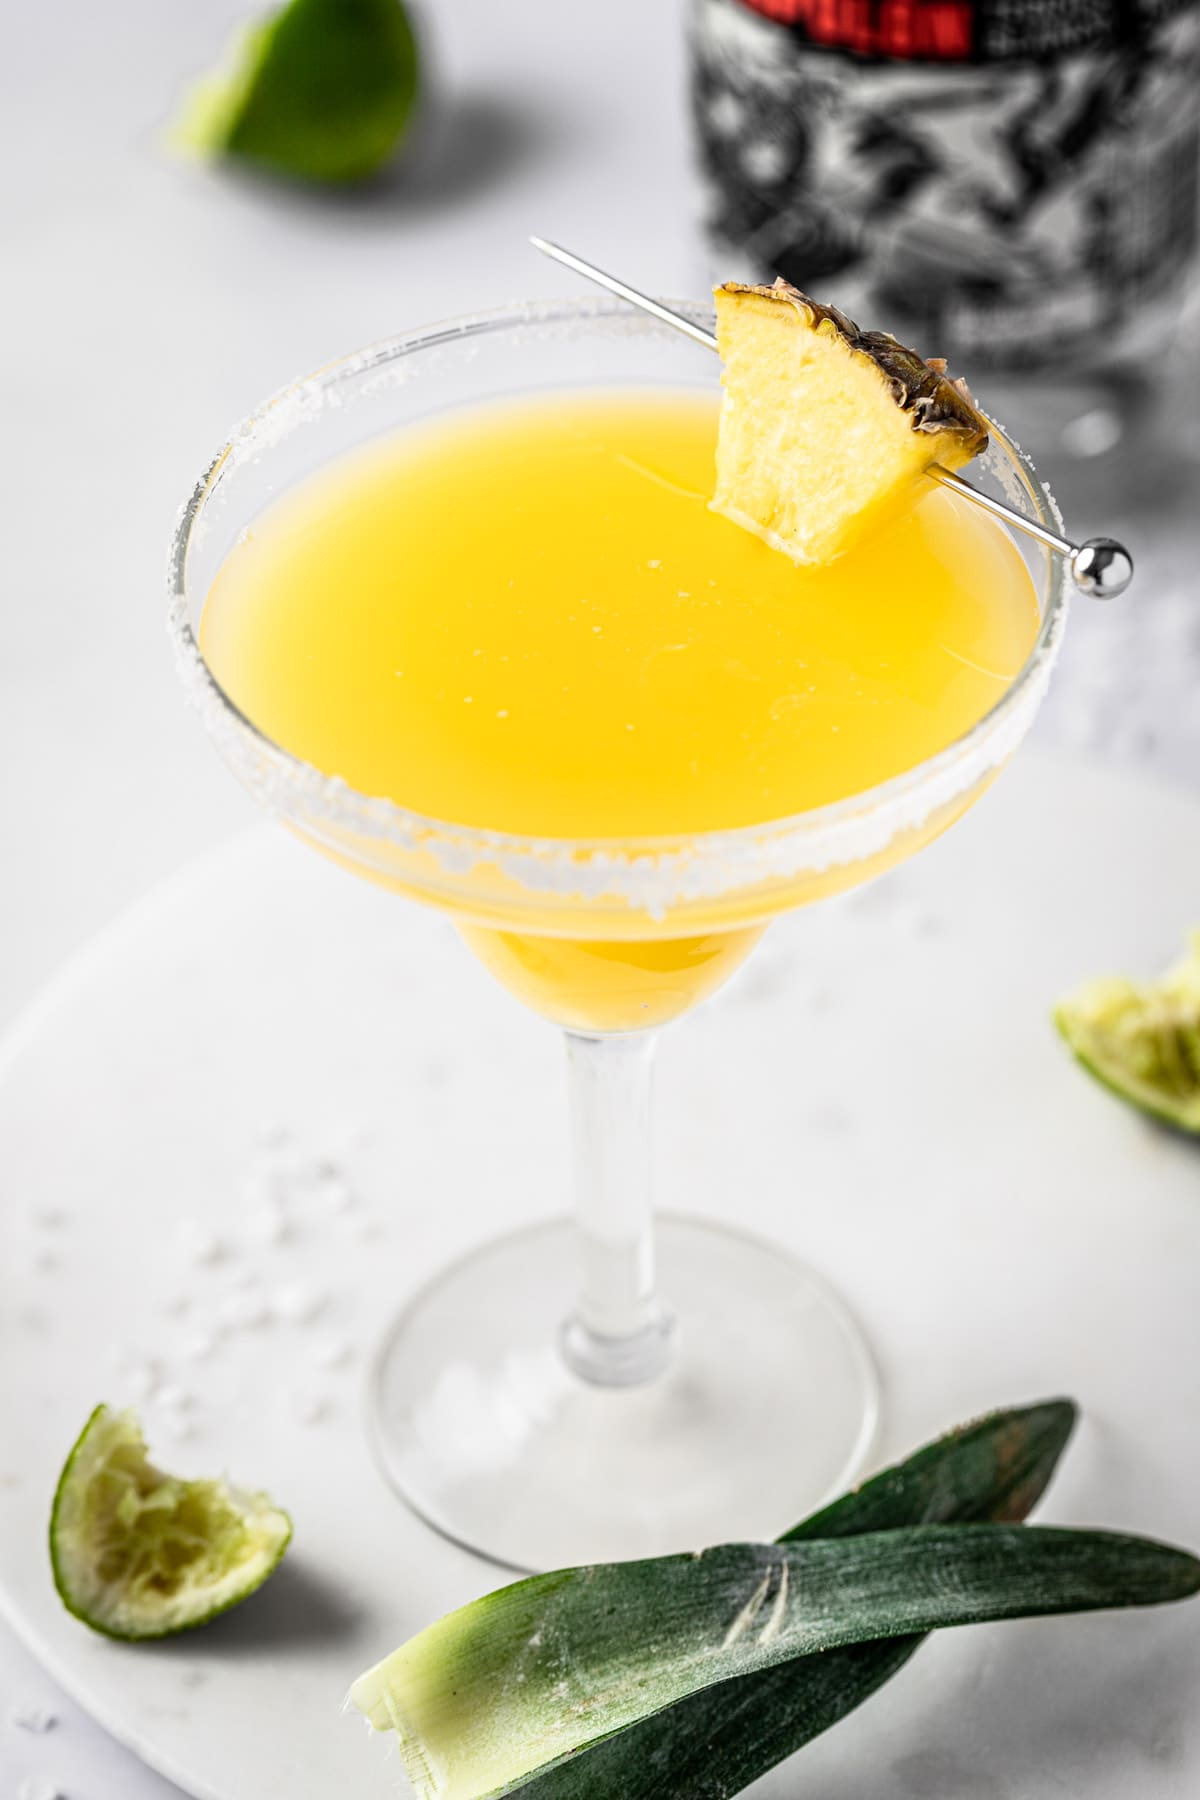 A pineapple orange margarita garnished with a pineapple slice and salted rim.